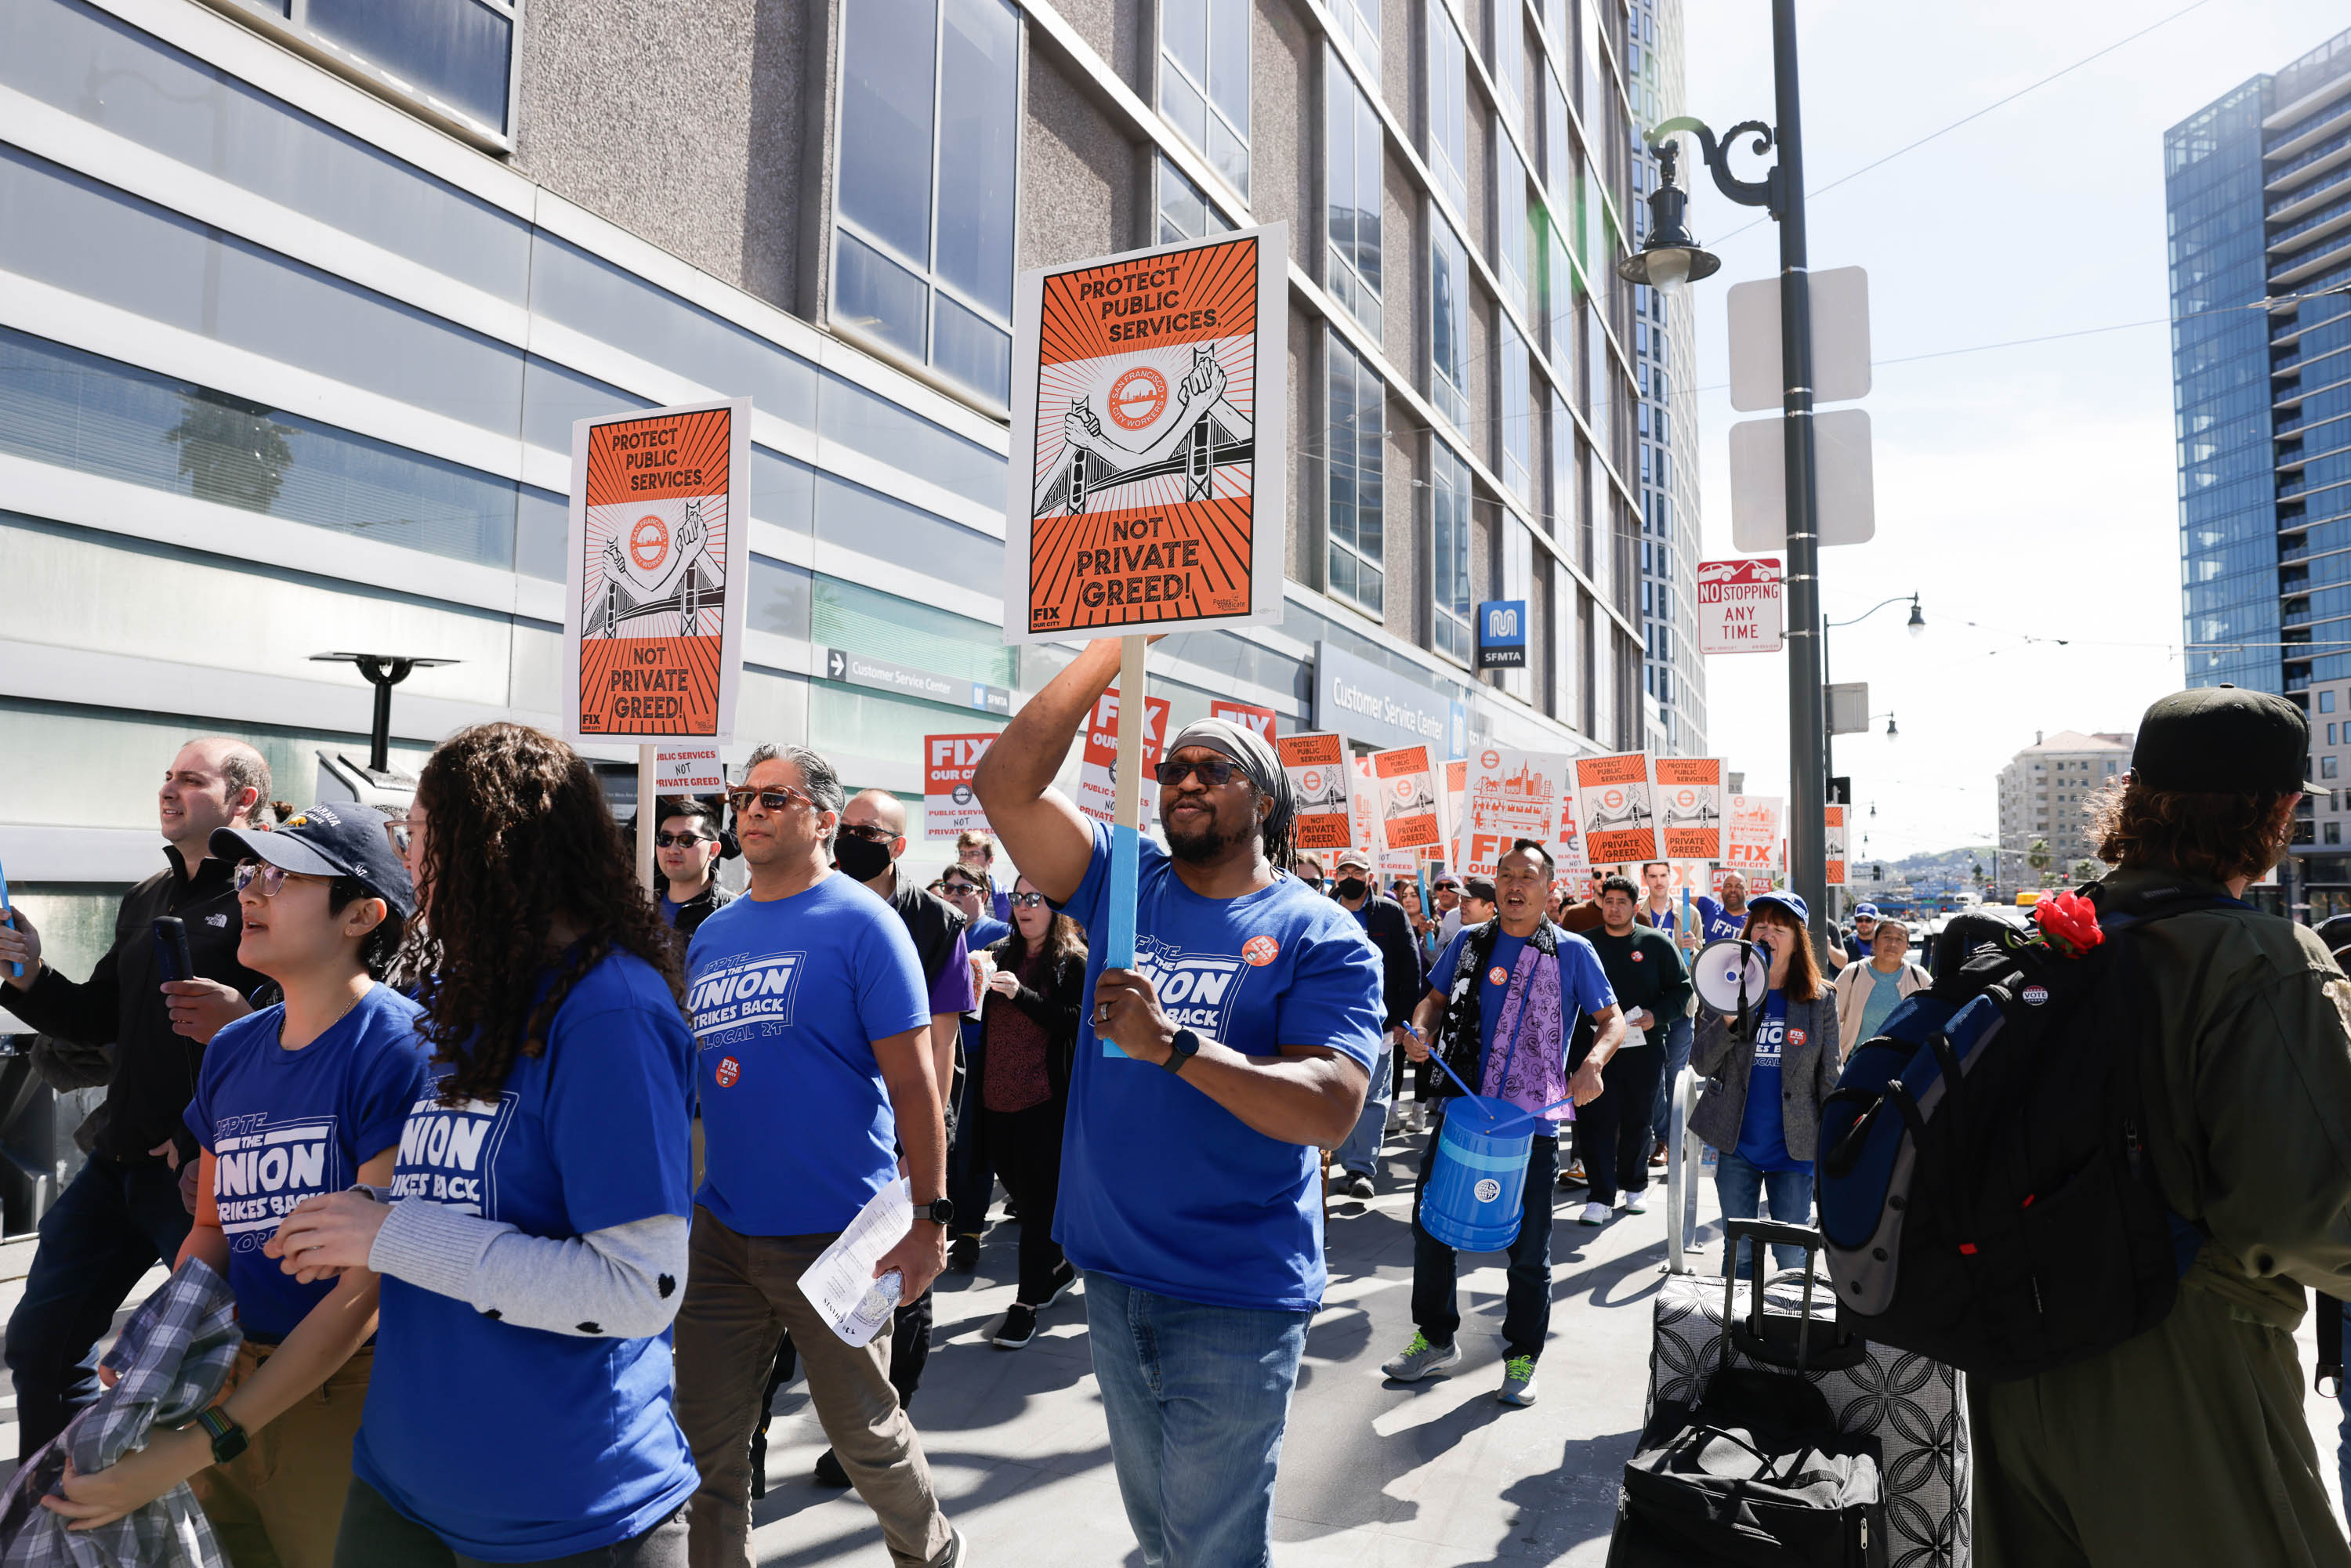 People marching in a protest with signs and blue union shirts, rallying against privatization.